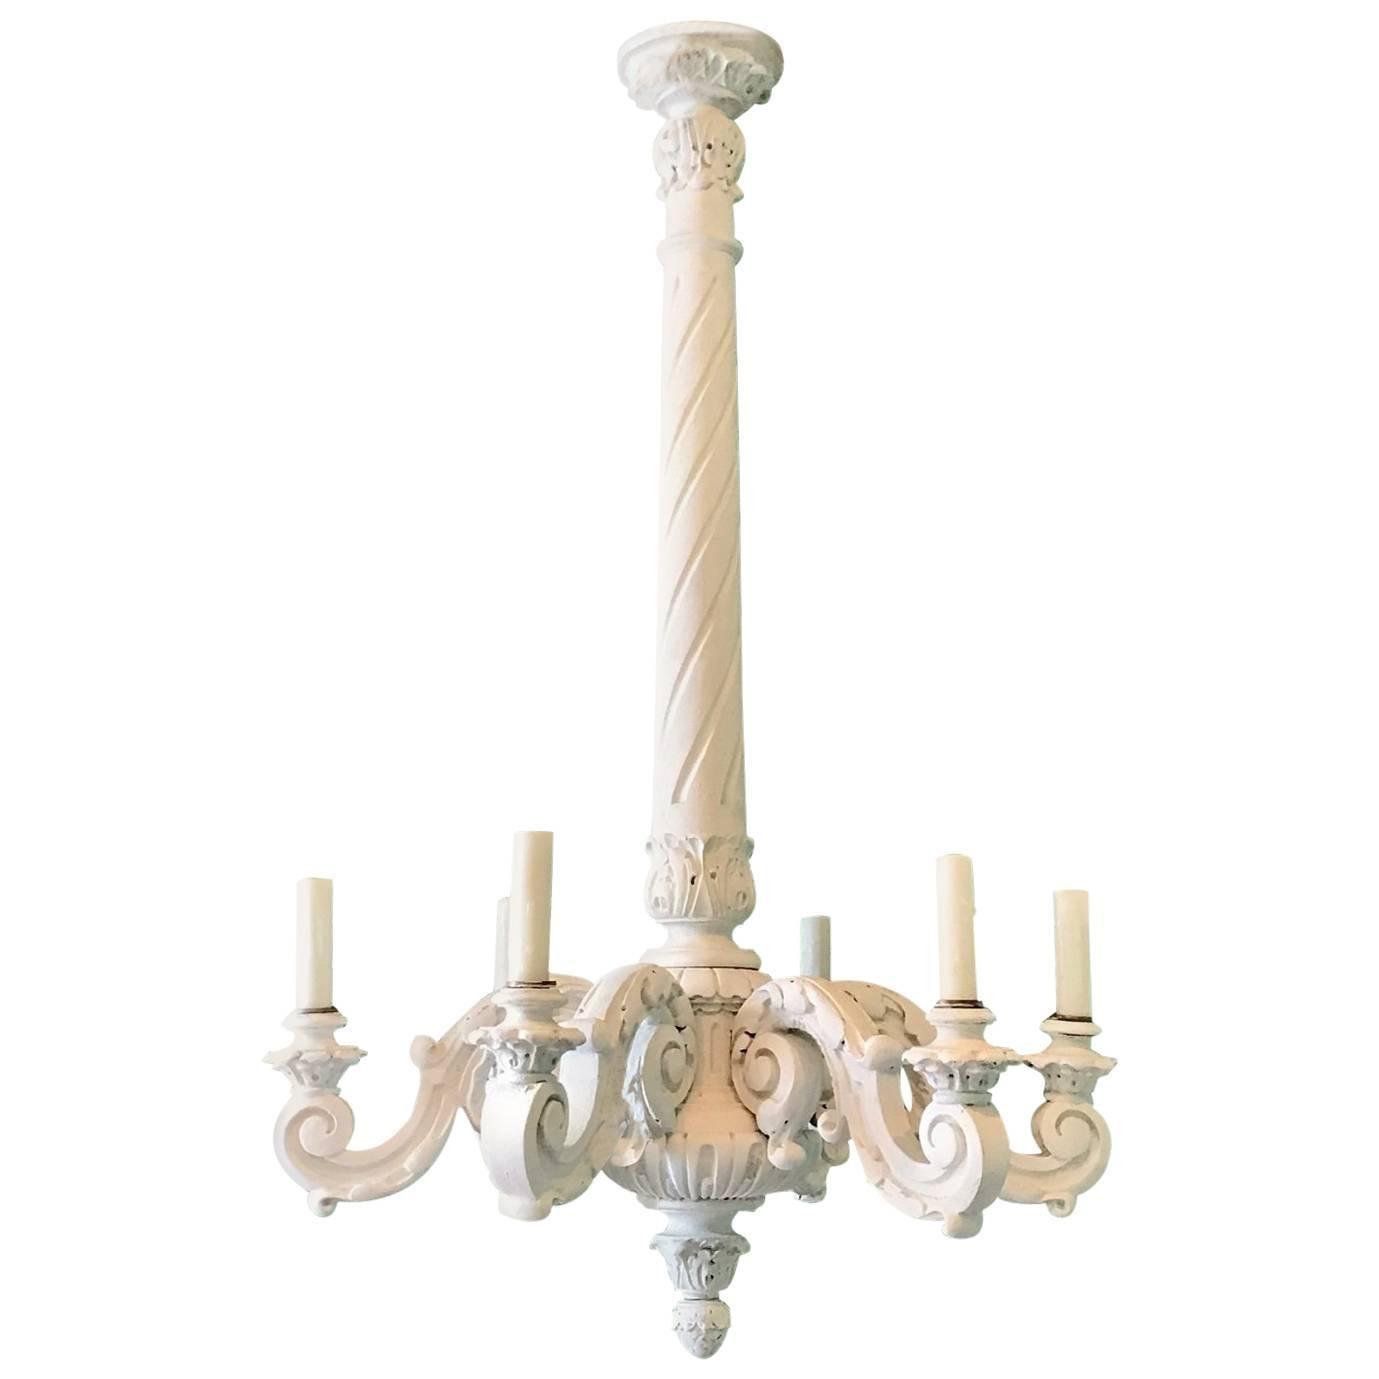 Italian Painted Wooden Chandelier For Sale